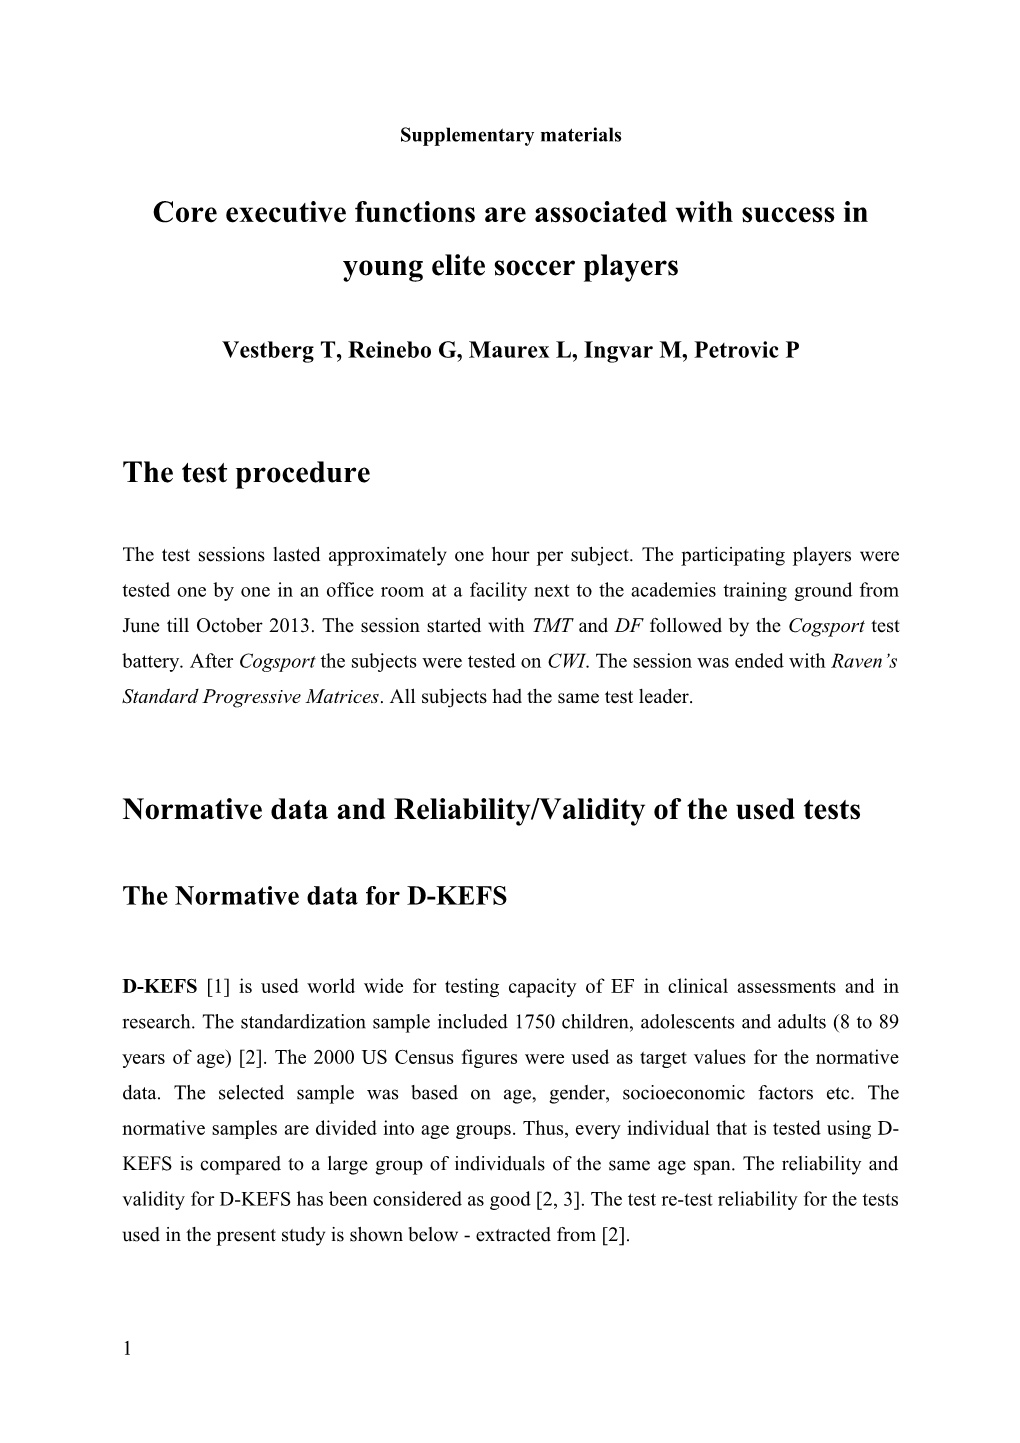 Core Executive Functions Are Associated with Success in Young Elite Soccer Players